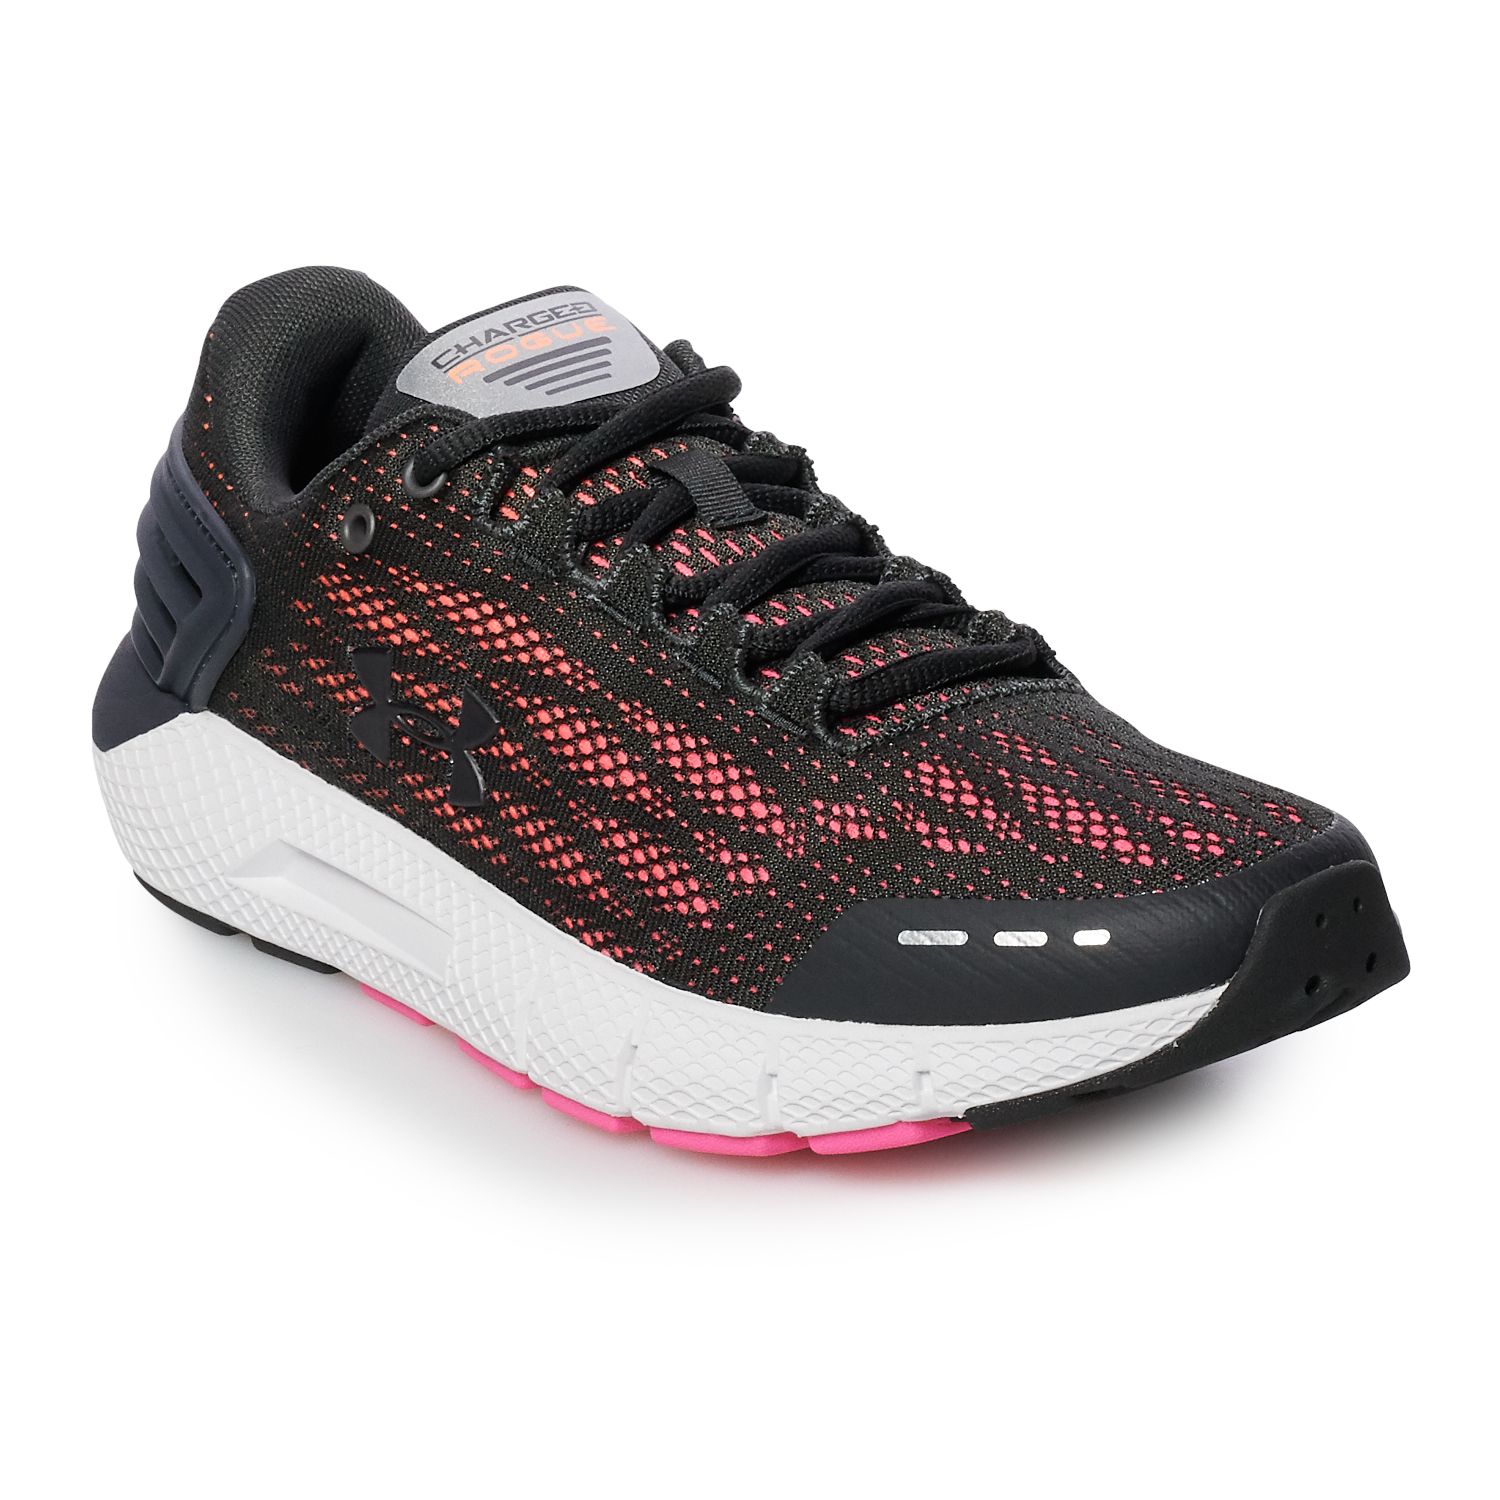 Under Armour Charged Rogue Women's 